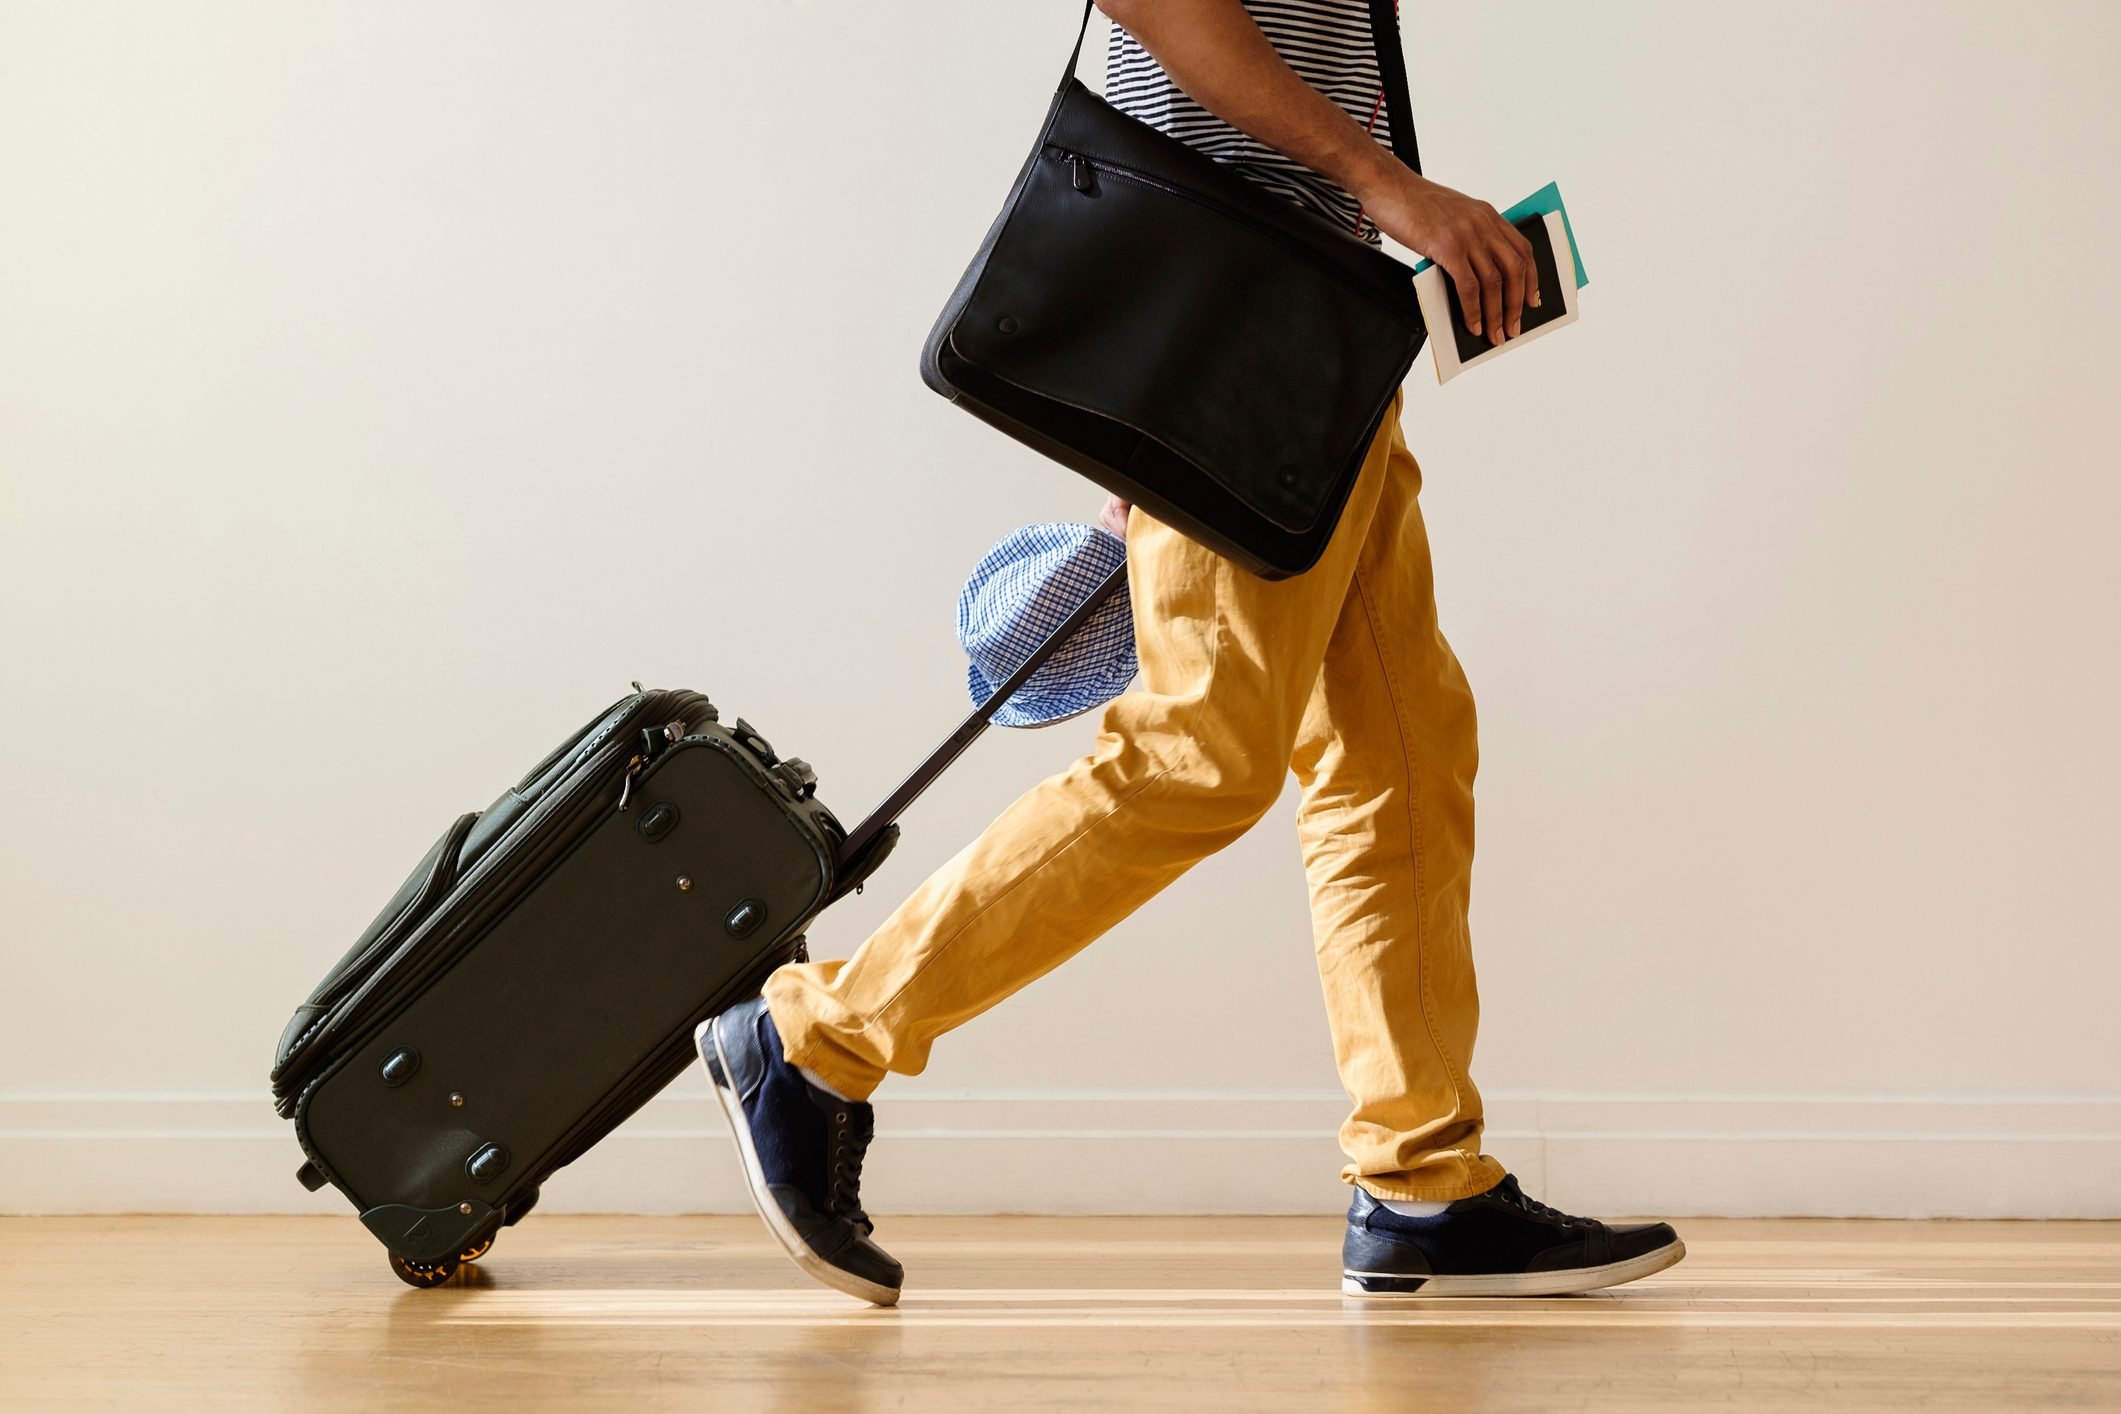 Headed on a trip? Flight attendants love this suitcase and carry